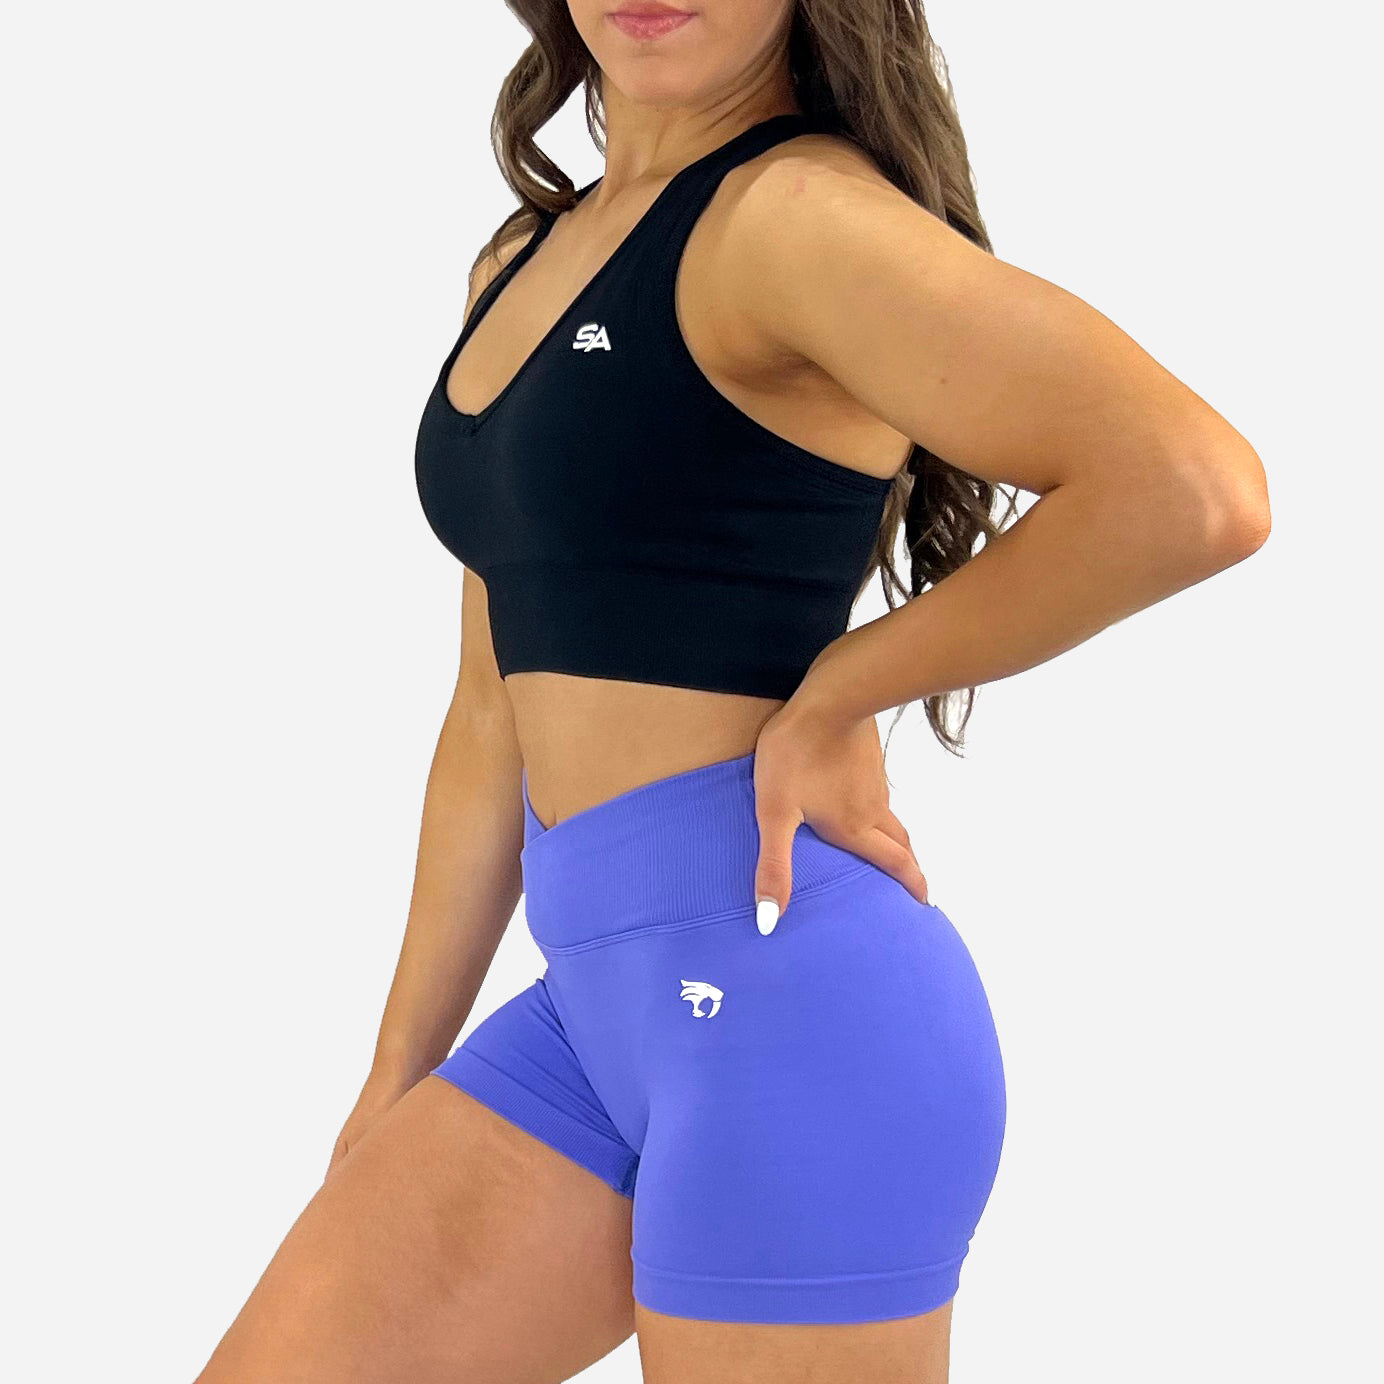 FOCUSSEXY 2 Pack Womens Stretch Yoga Shorts Sport Shorts India